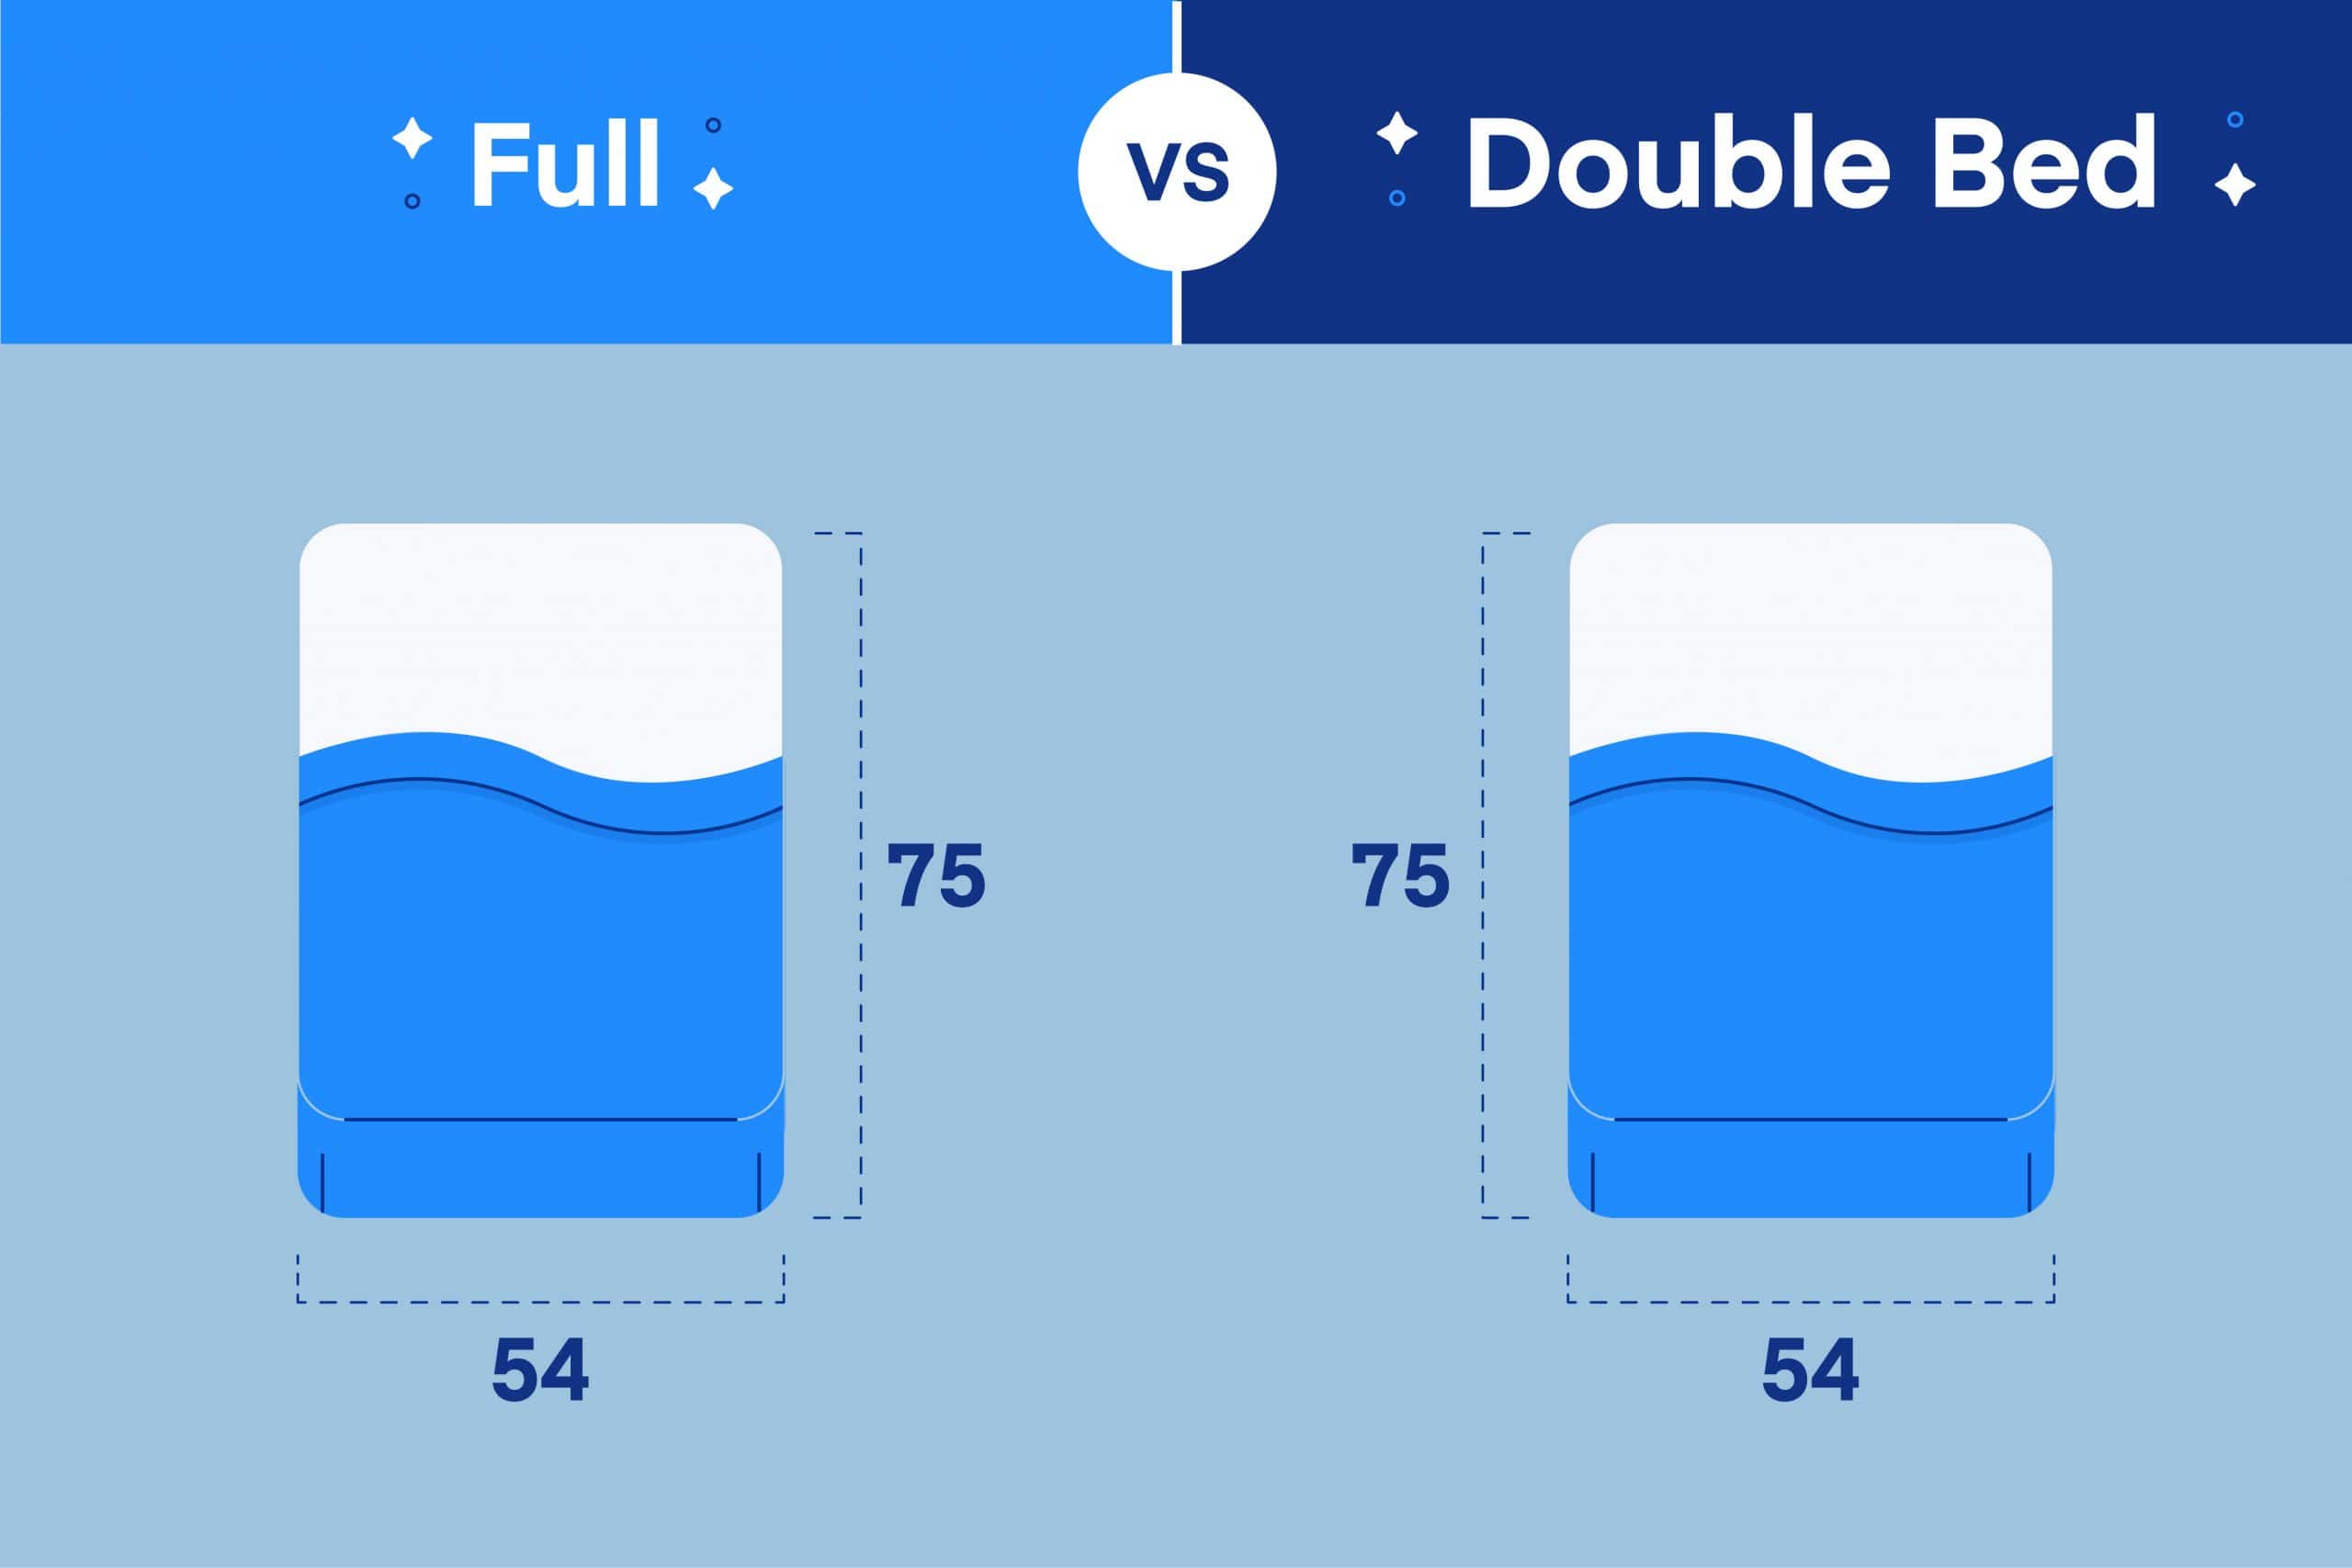 What’s the Difference Between a Double Bed and Full Size Mattress?